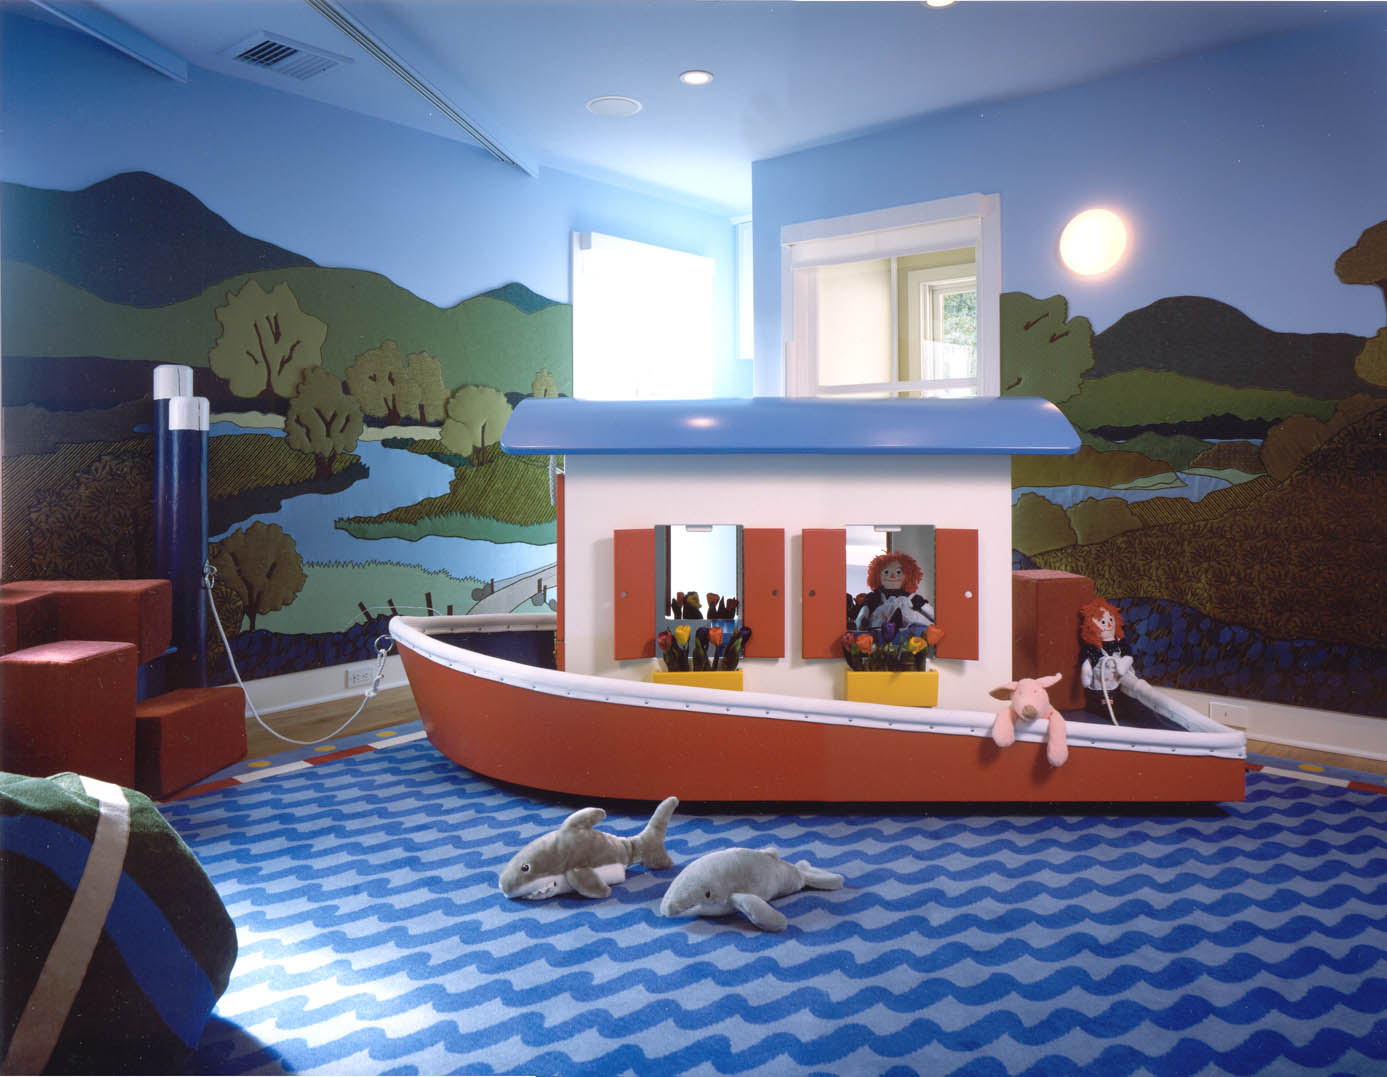  Children&#039;s Playroom Ideas for Large Space